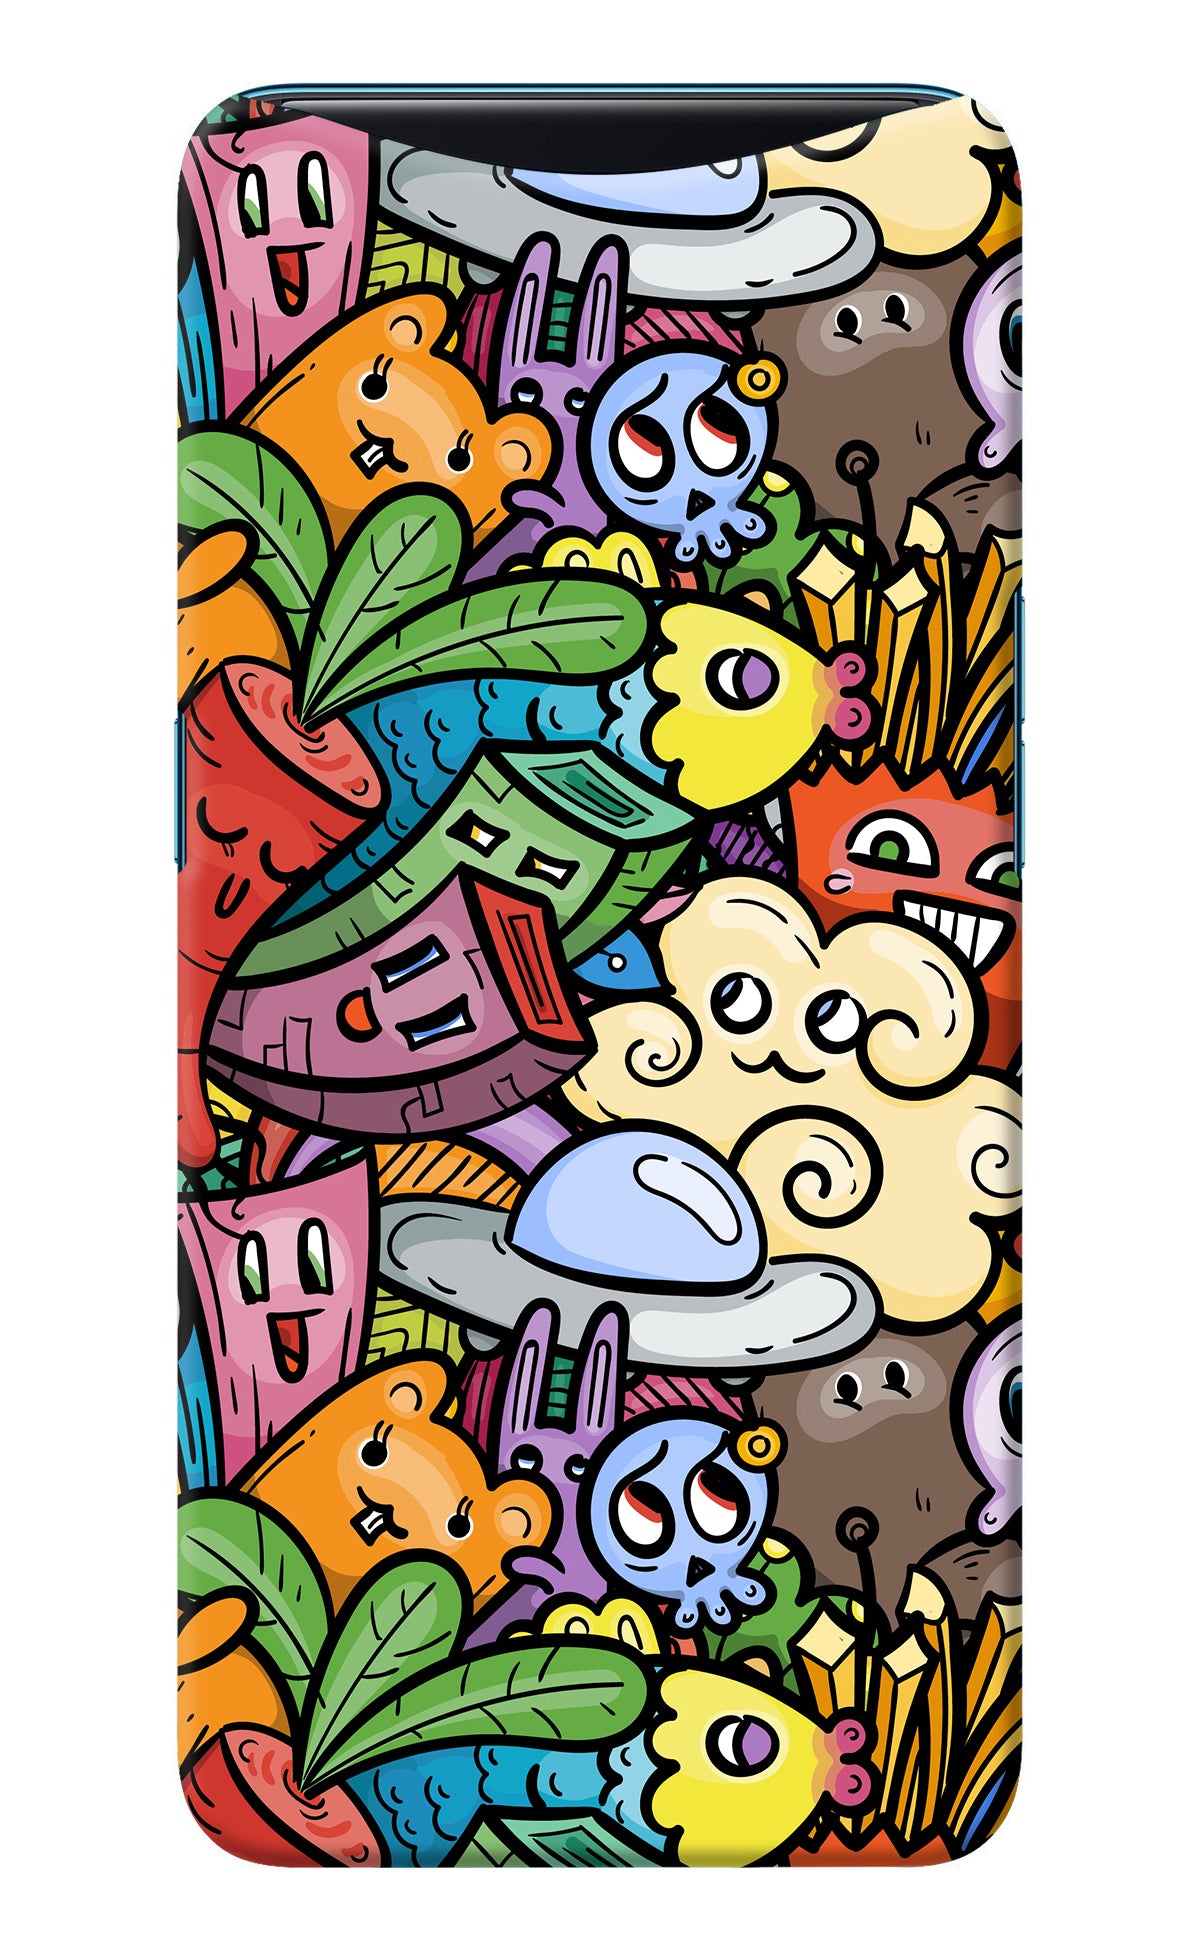 Veggie Doodle Oppo Find X Back Cover